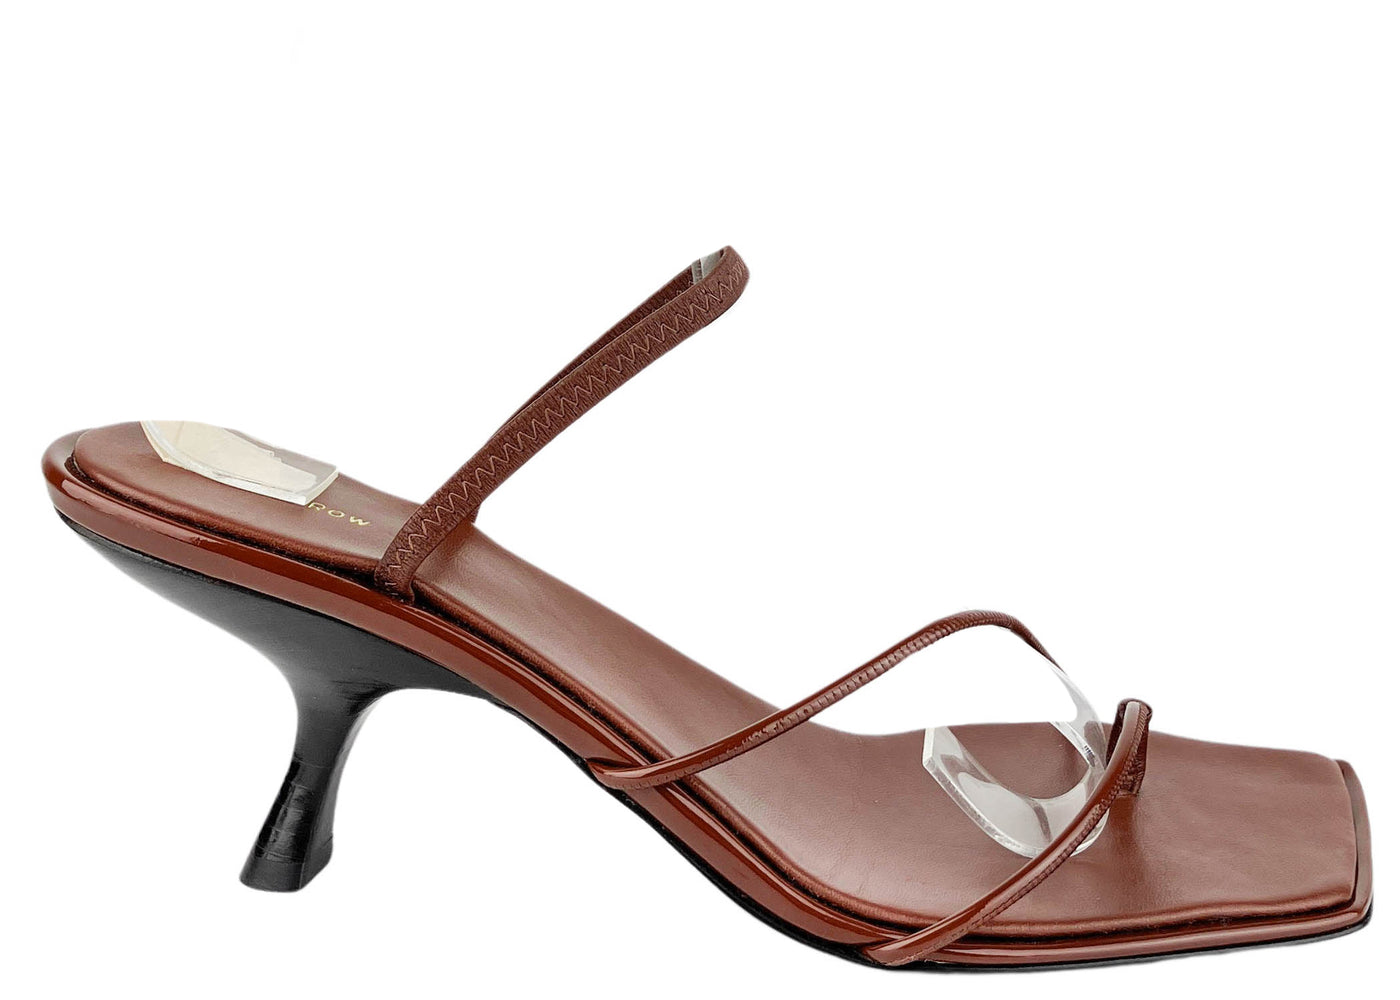 The Row Rai Sandals in Hazel - Discounts on The Row at UAL